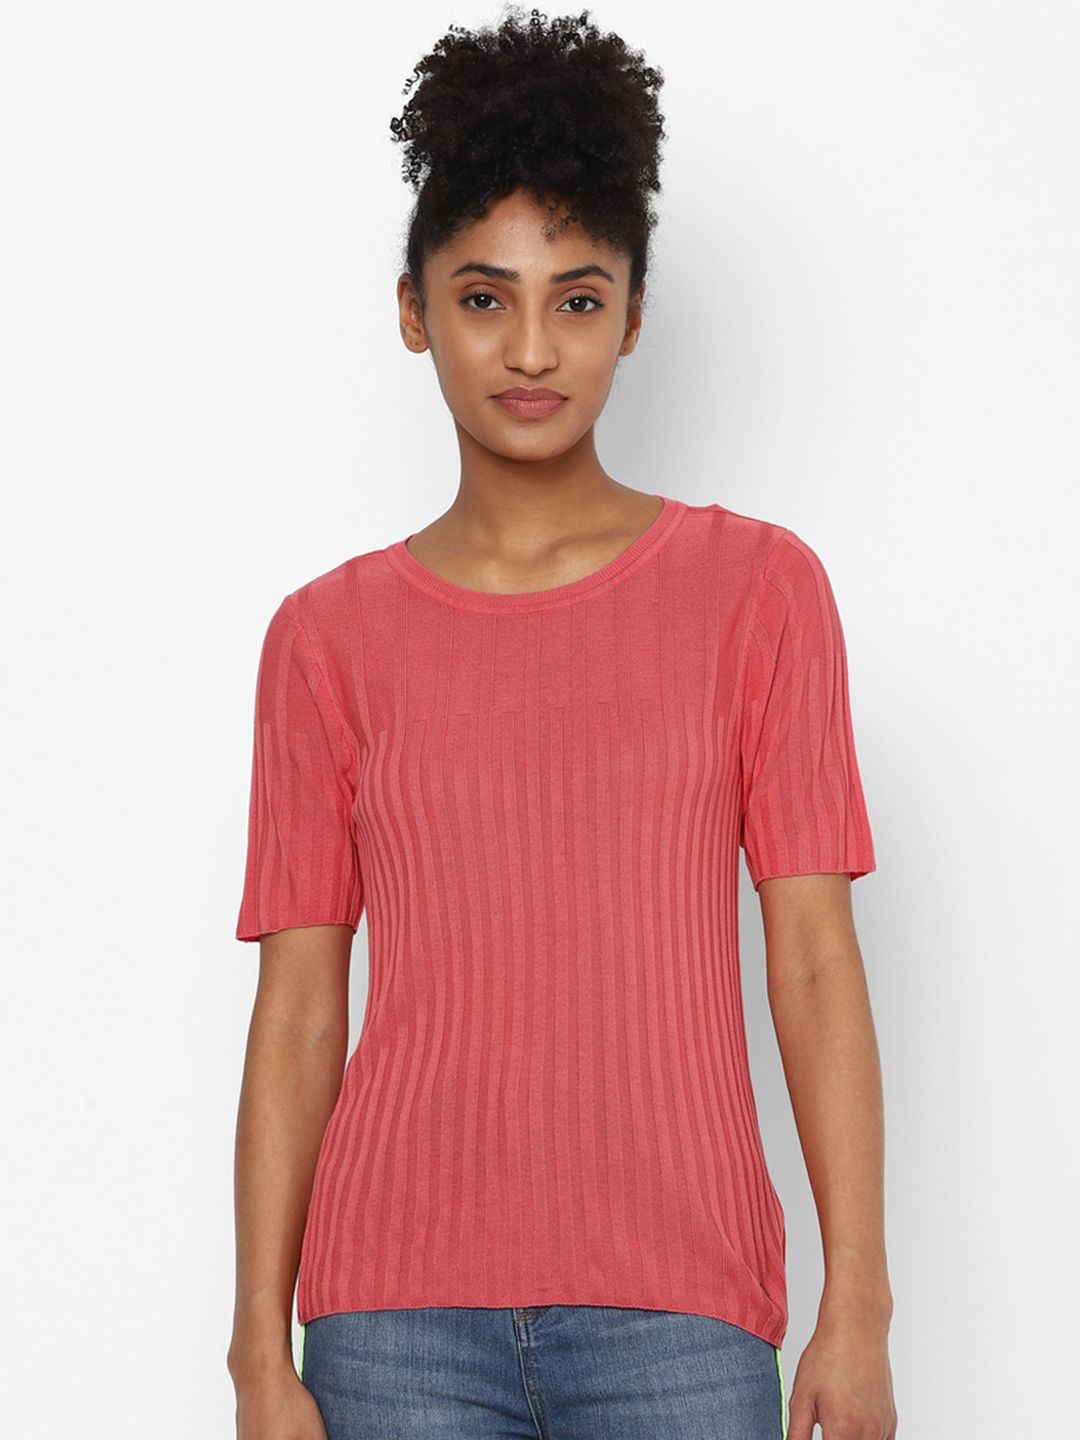 Allen Solly Woman Pink Striped Top Price in India